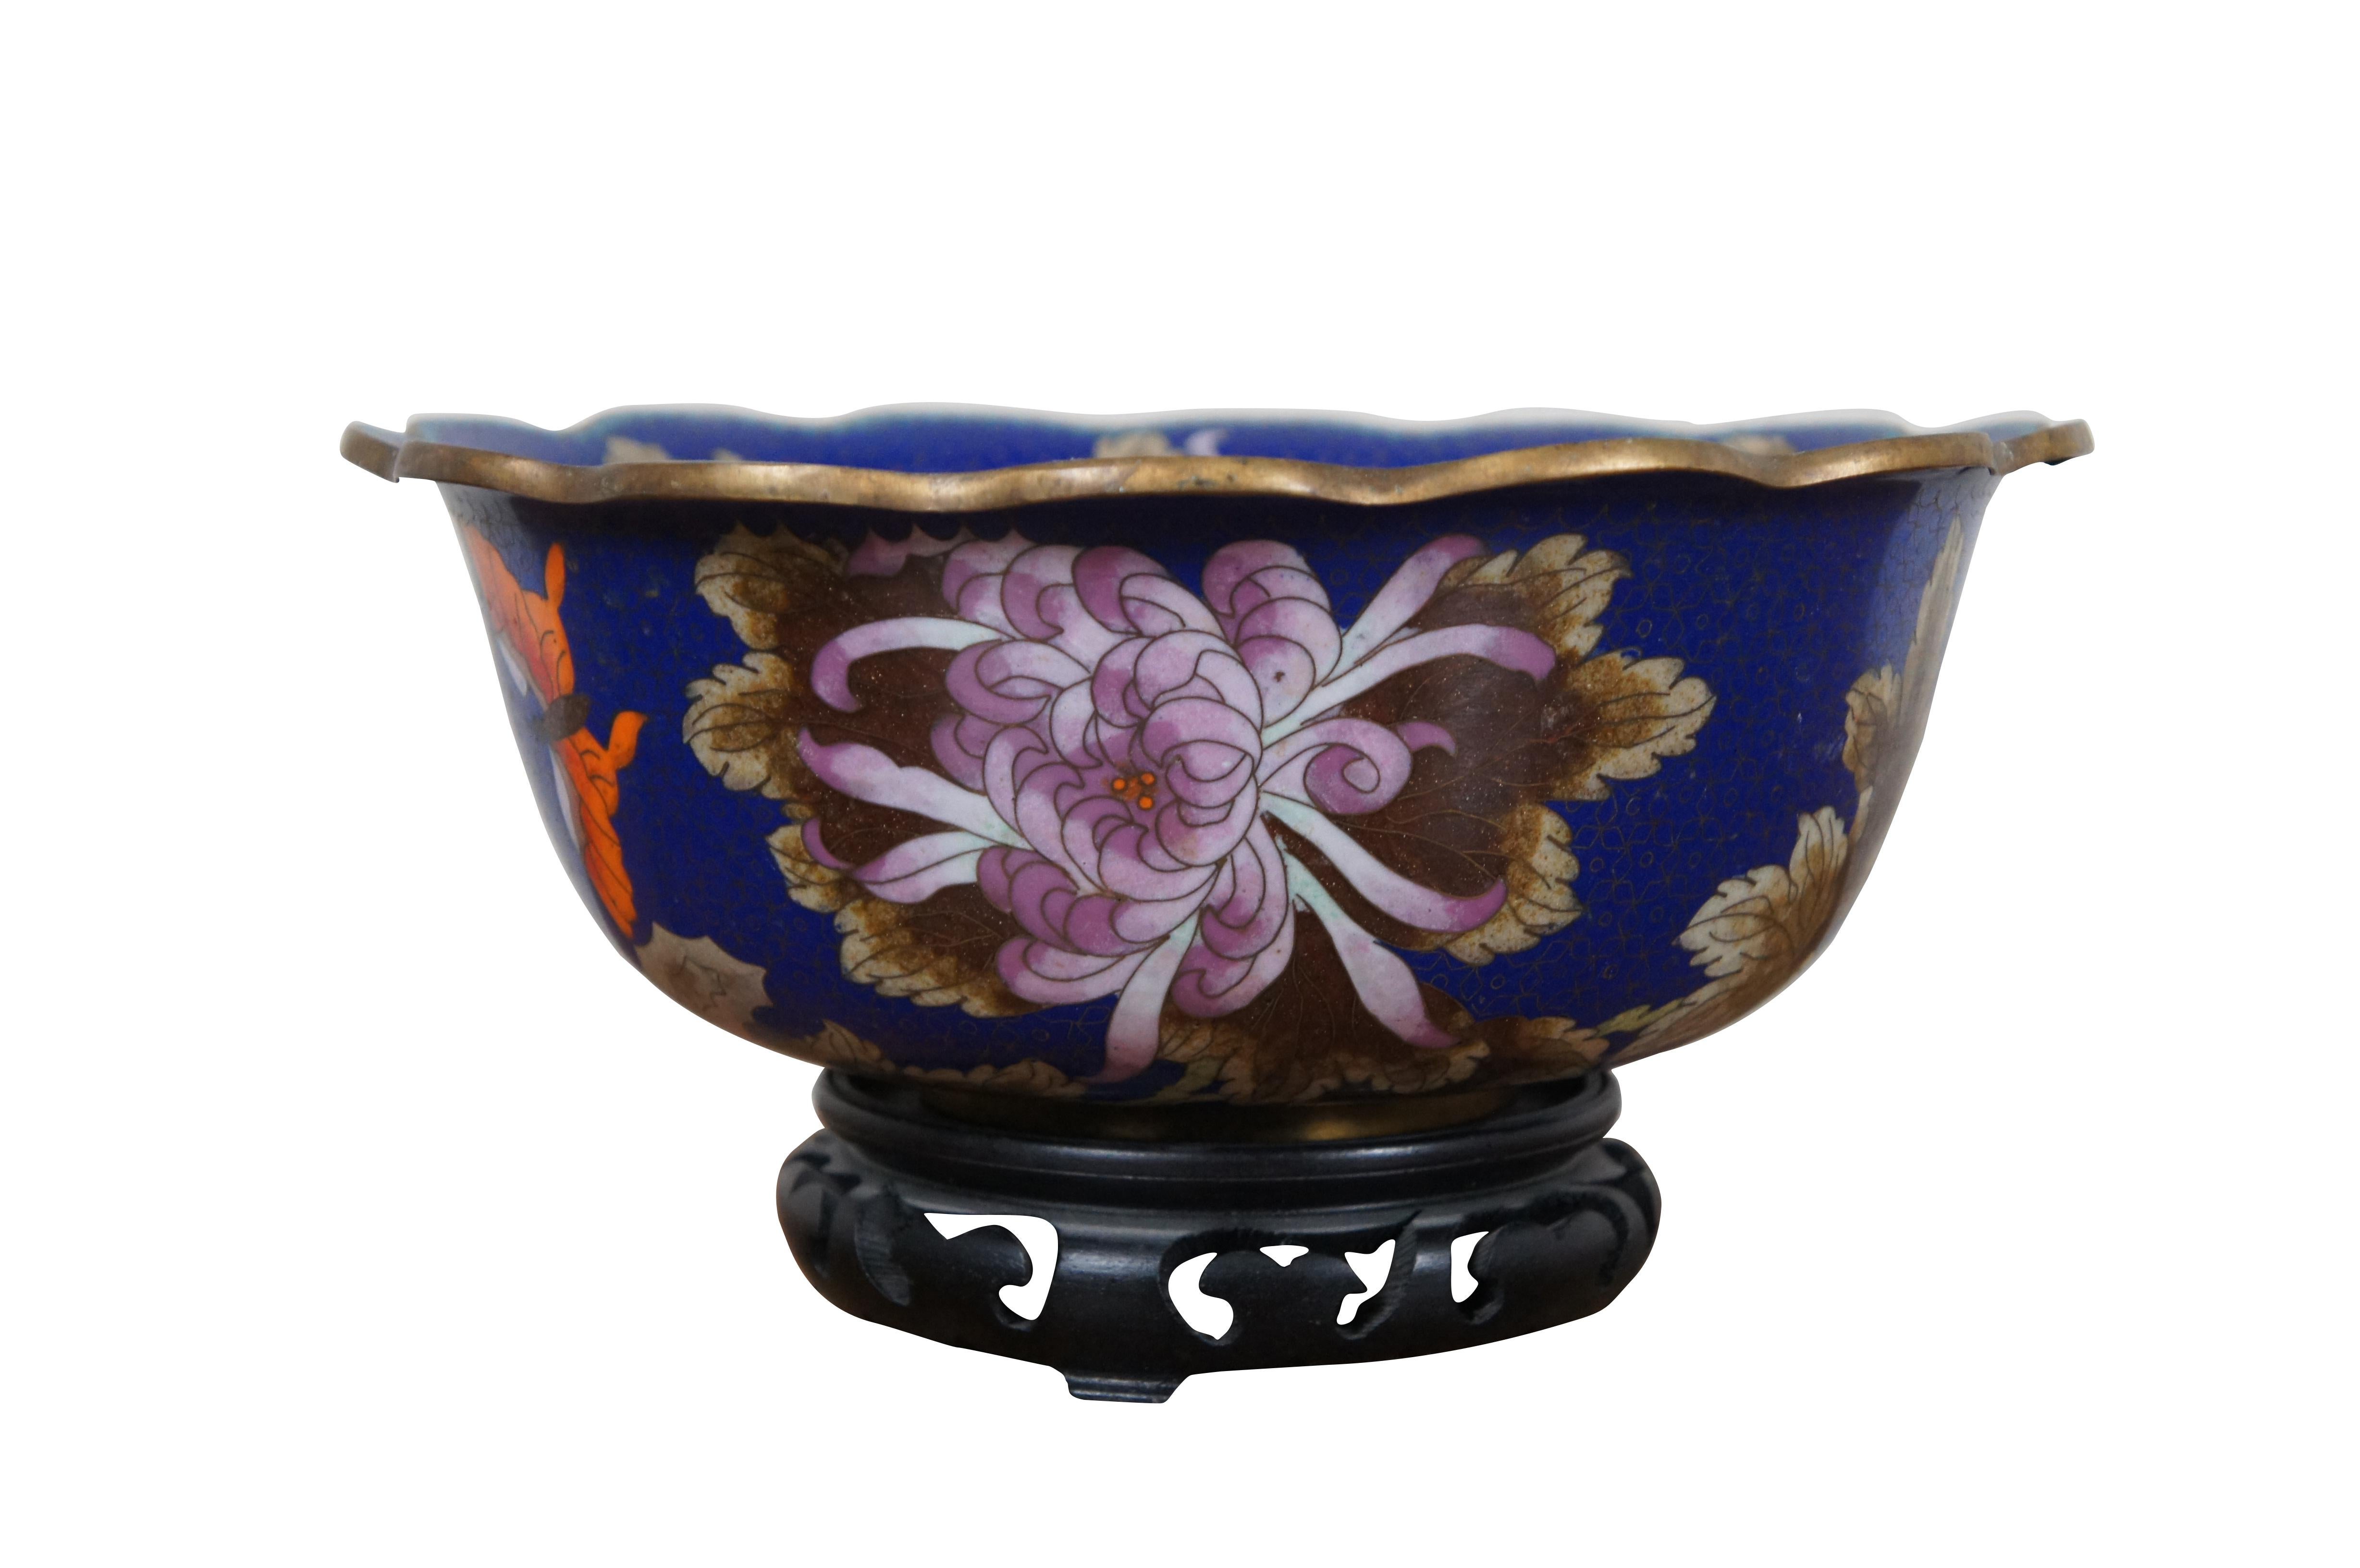 Chinoiserie Chinese Cloisonne Floral Chrysanthemum Butterfly Scalloped Centerpiece Bowl 10